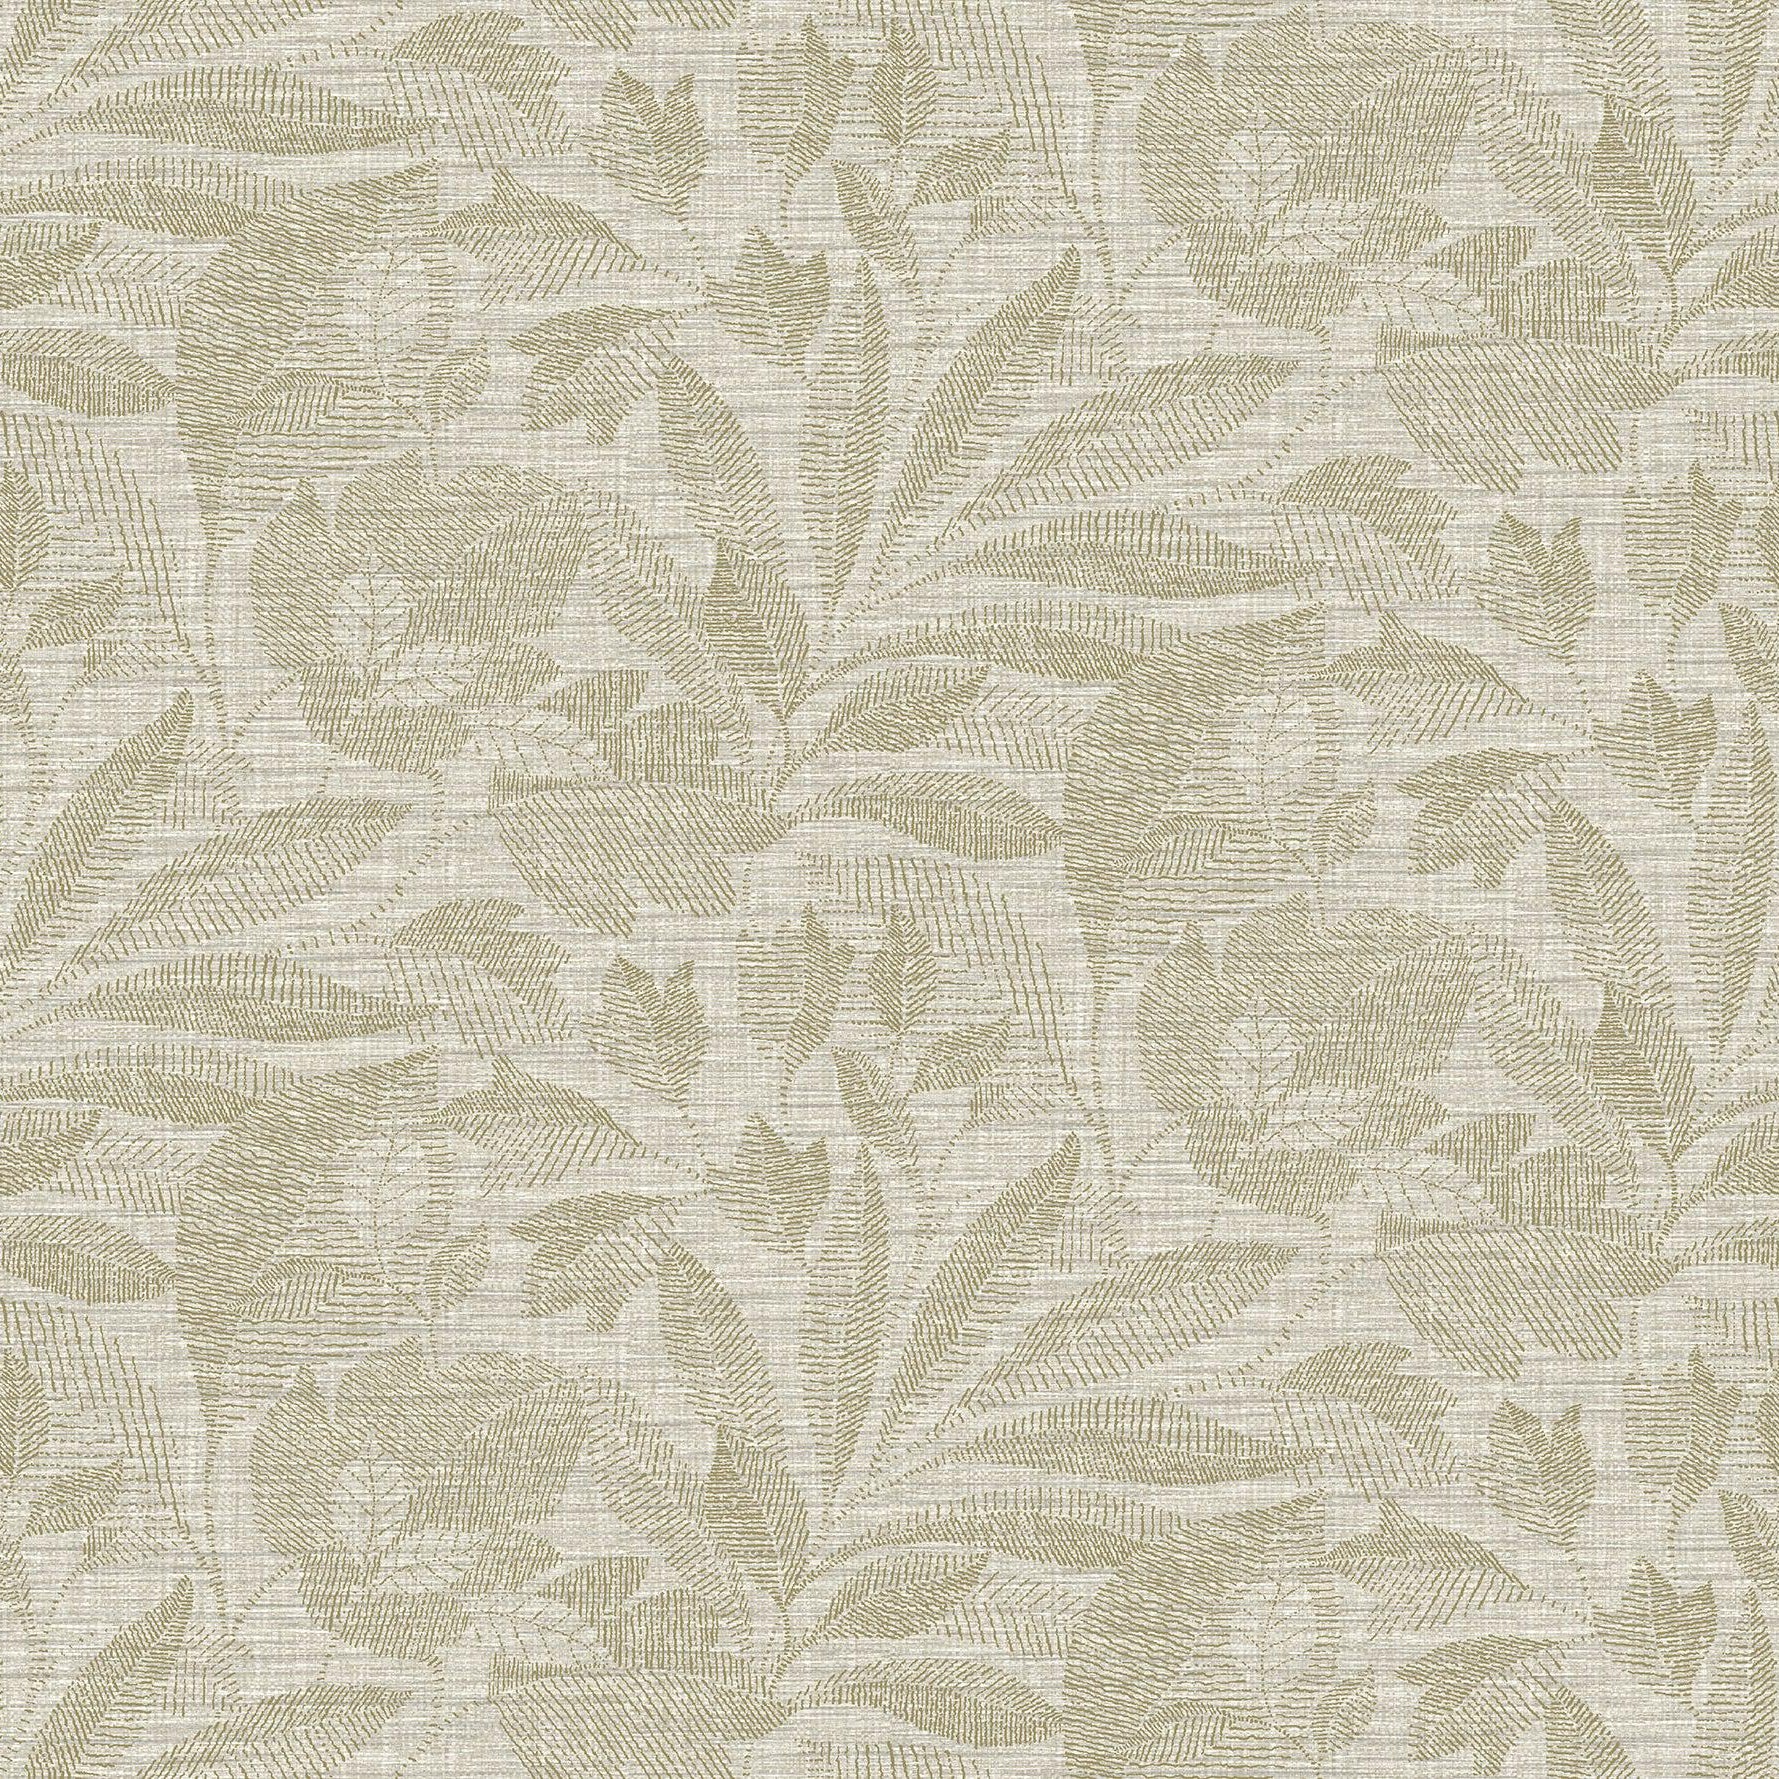 Save on 2971-86150 Dimensions Lei Neutral Etched Leaves Neutral A-Street Prints Wallpaper